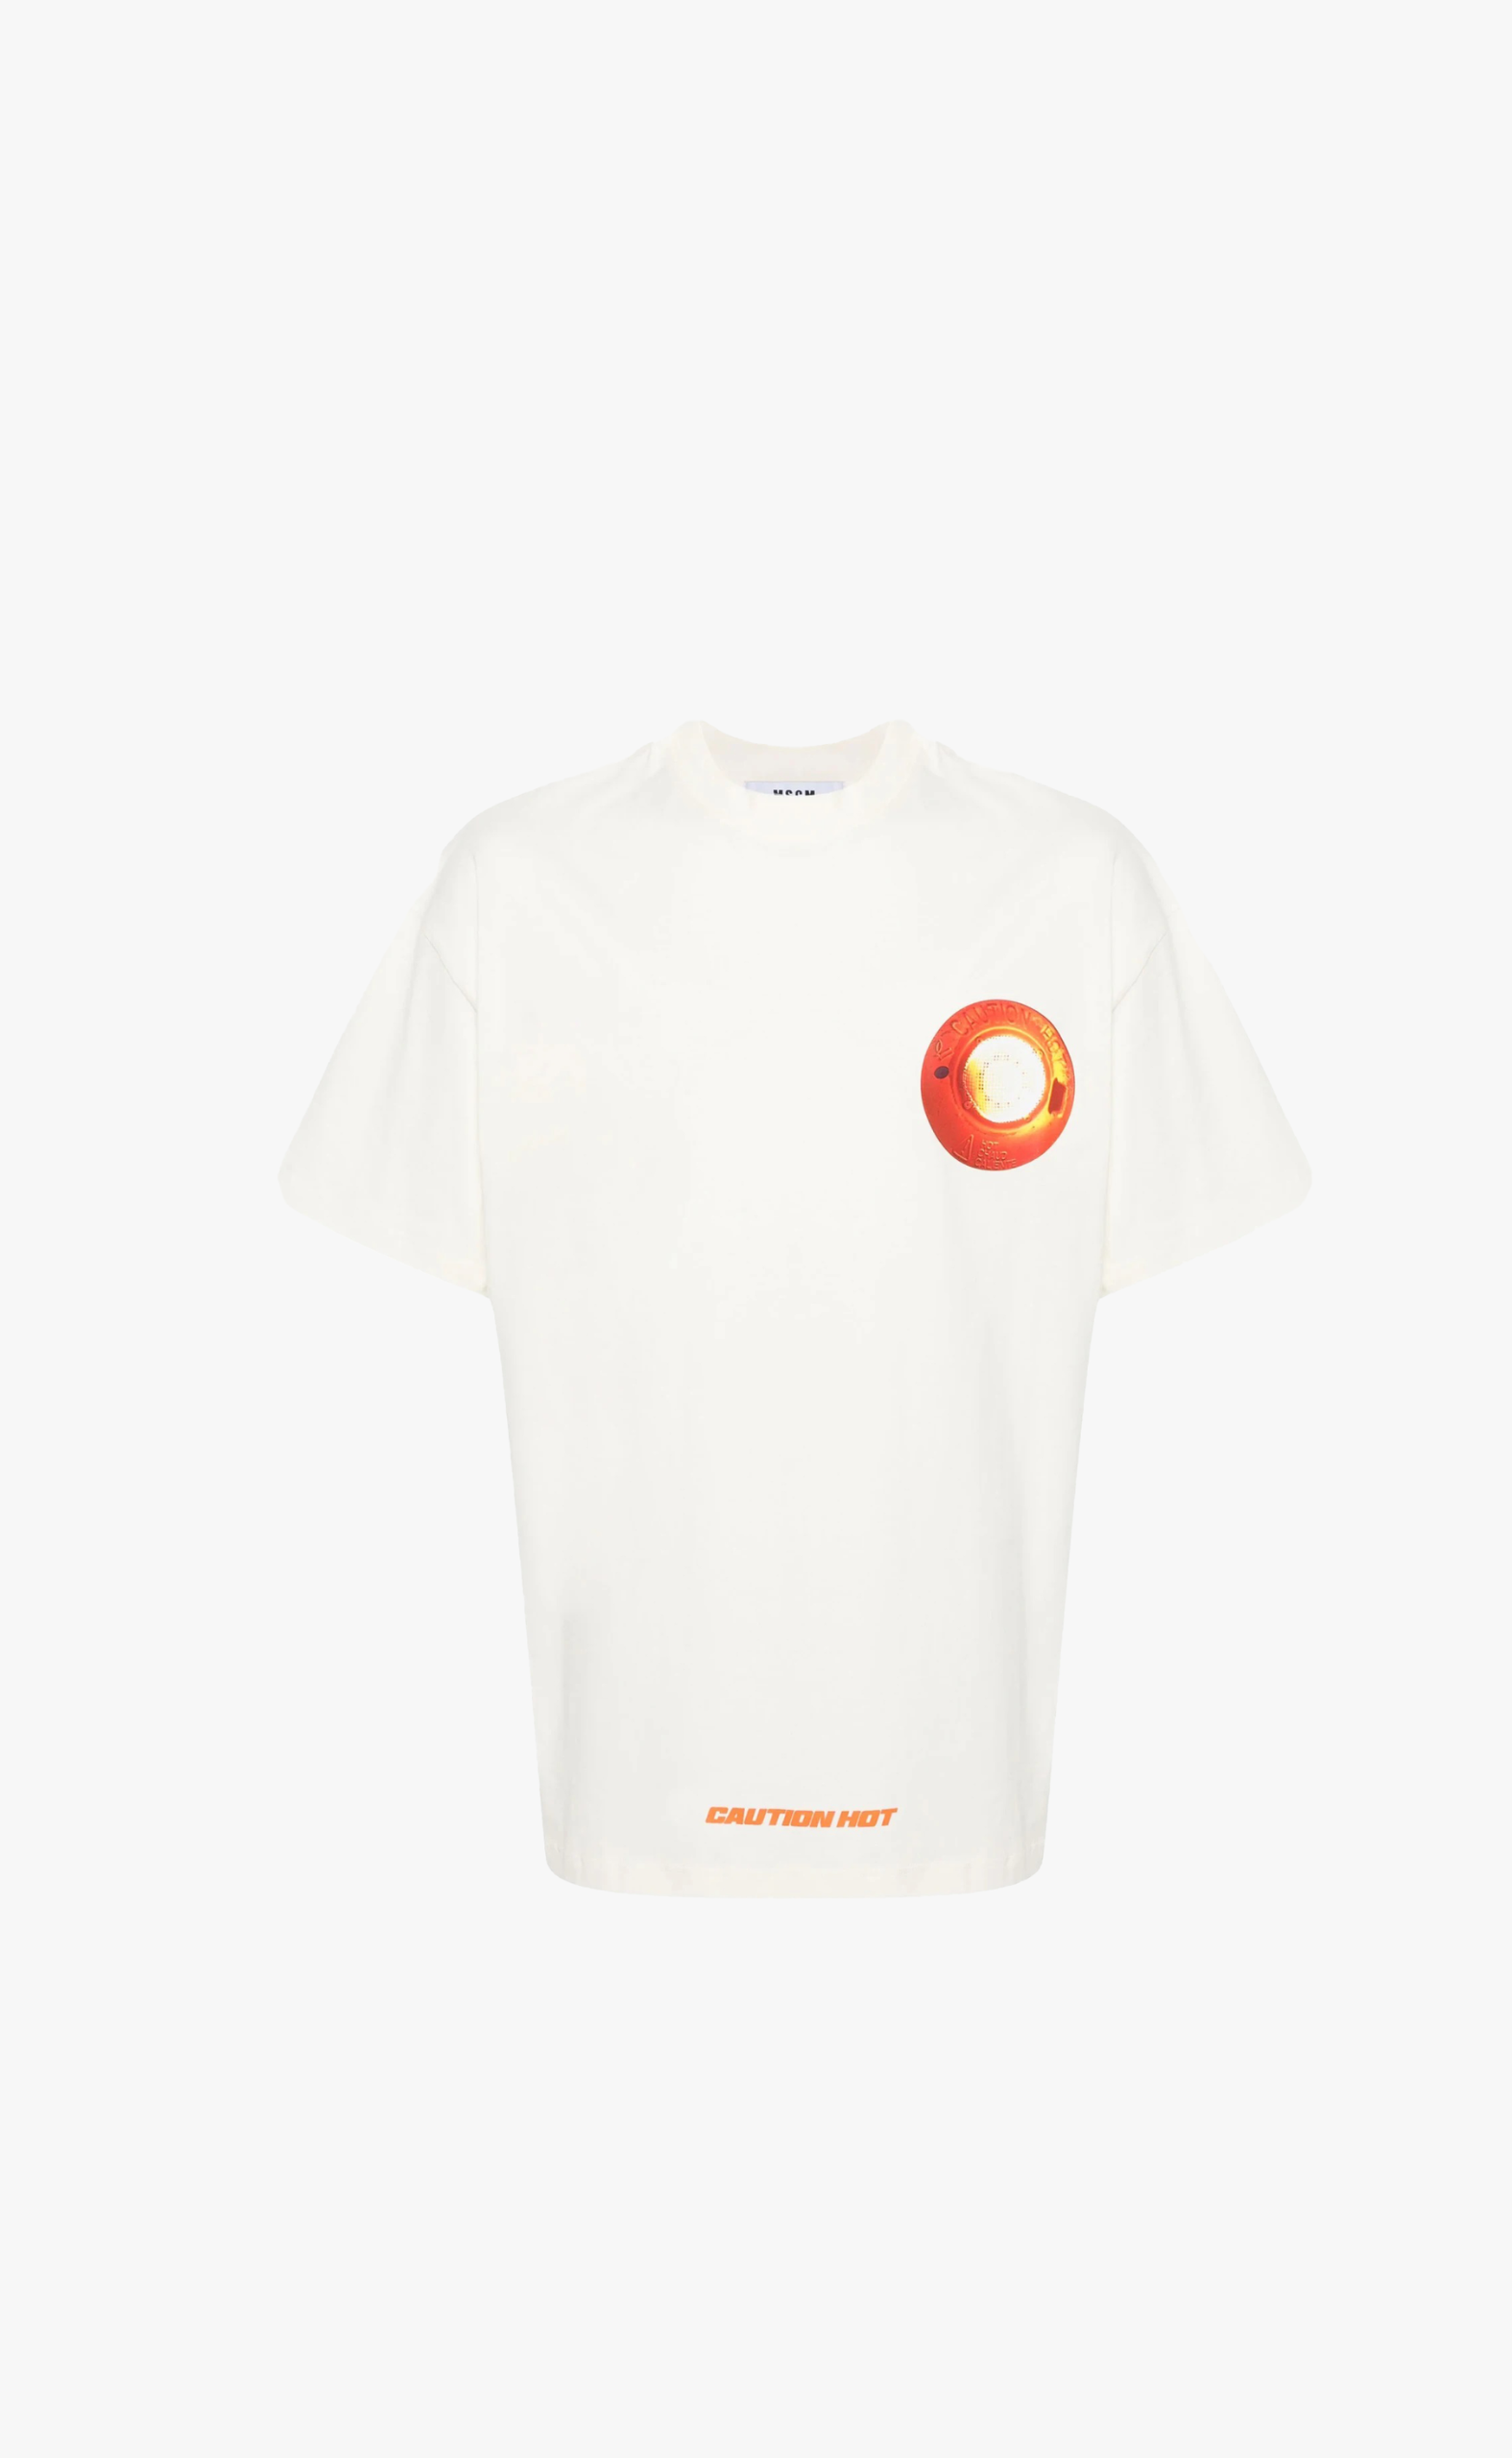 CAUTION HOT GRAPHIC OFF WHITE T-SHIRT